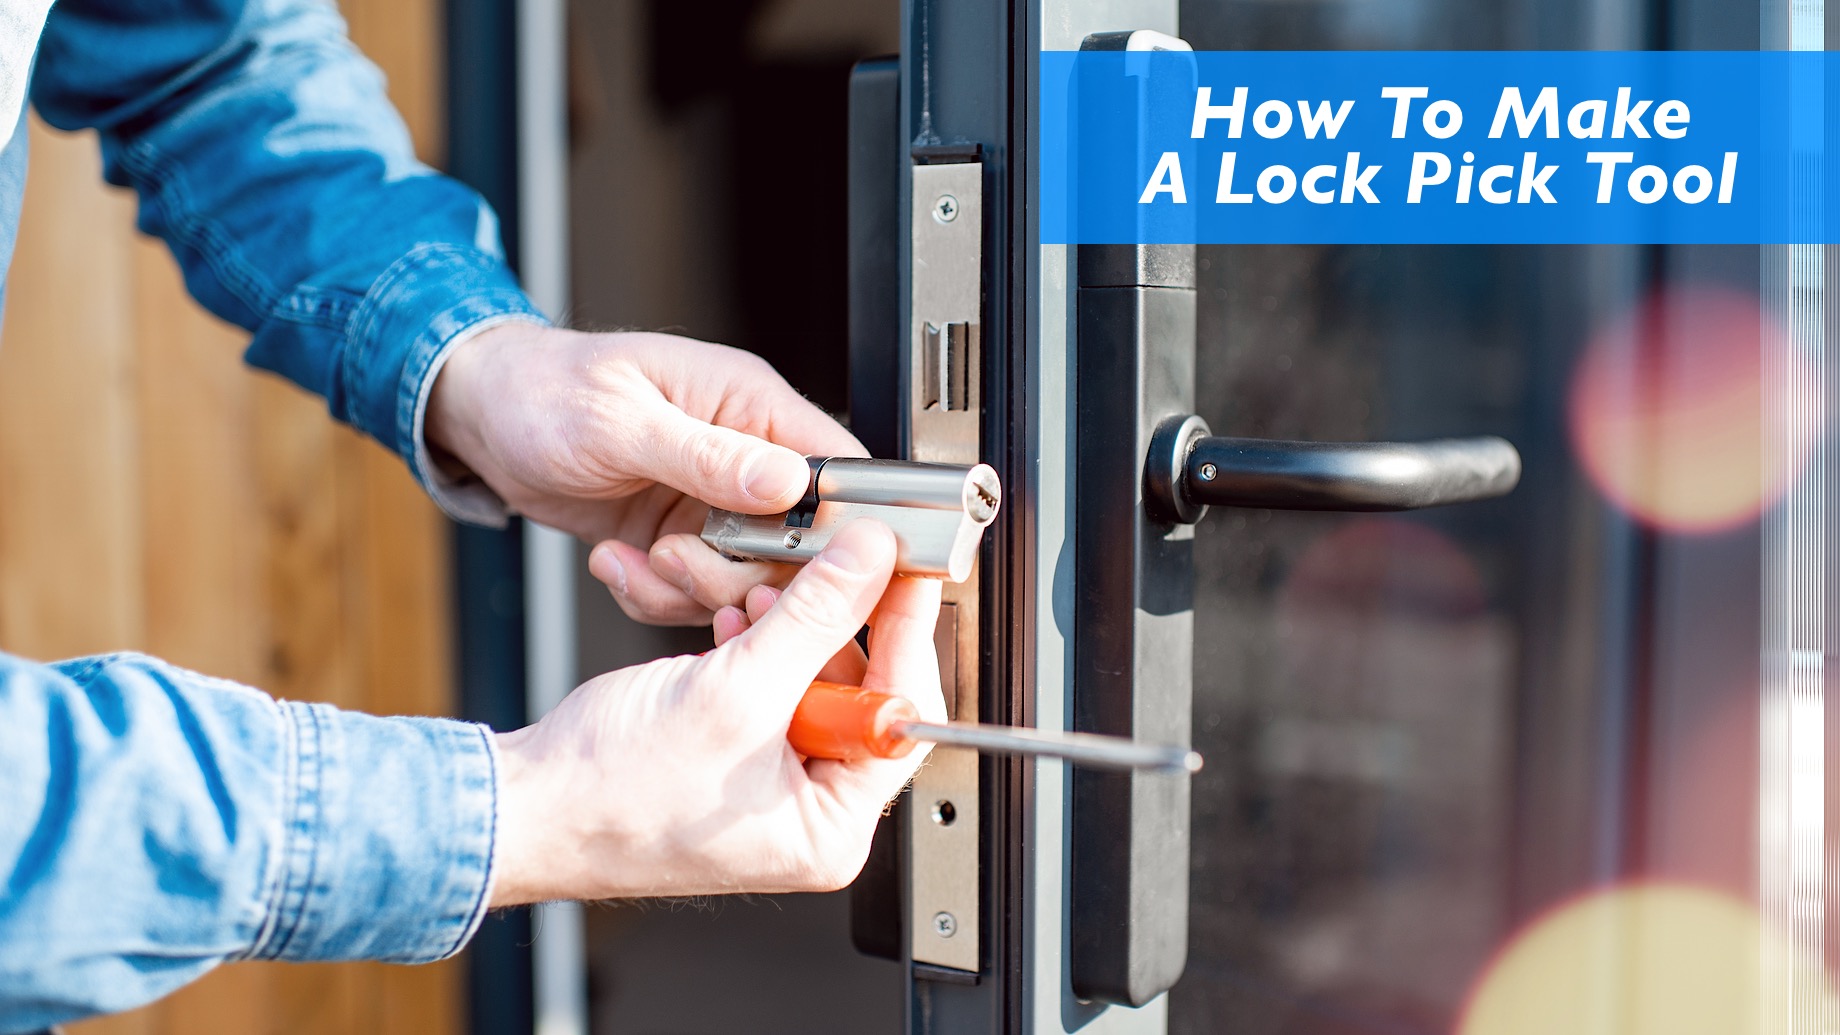 Locksmith Tools DIY Material Recommendation - How To Make A Lock Pick Tool